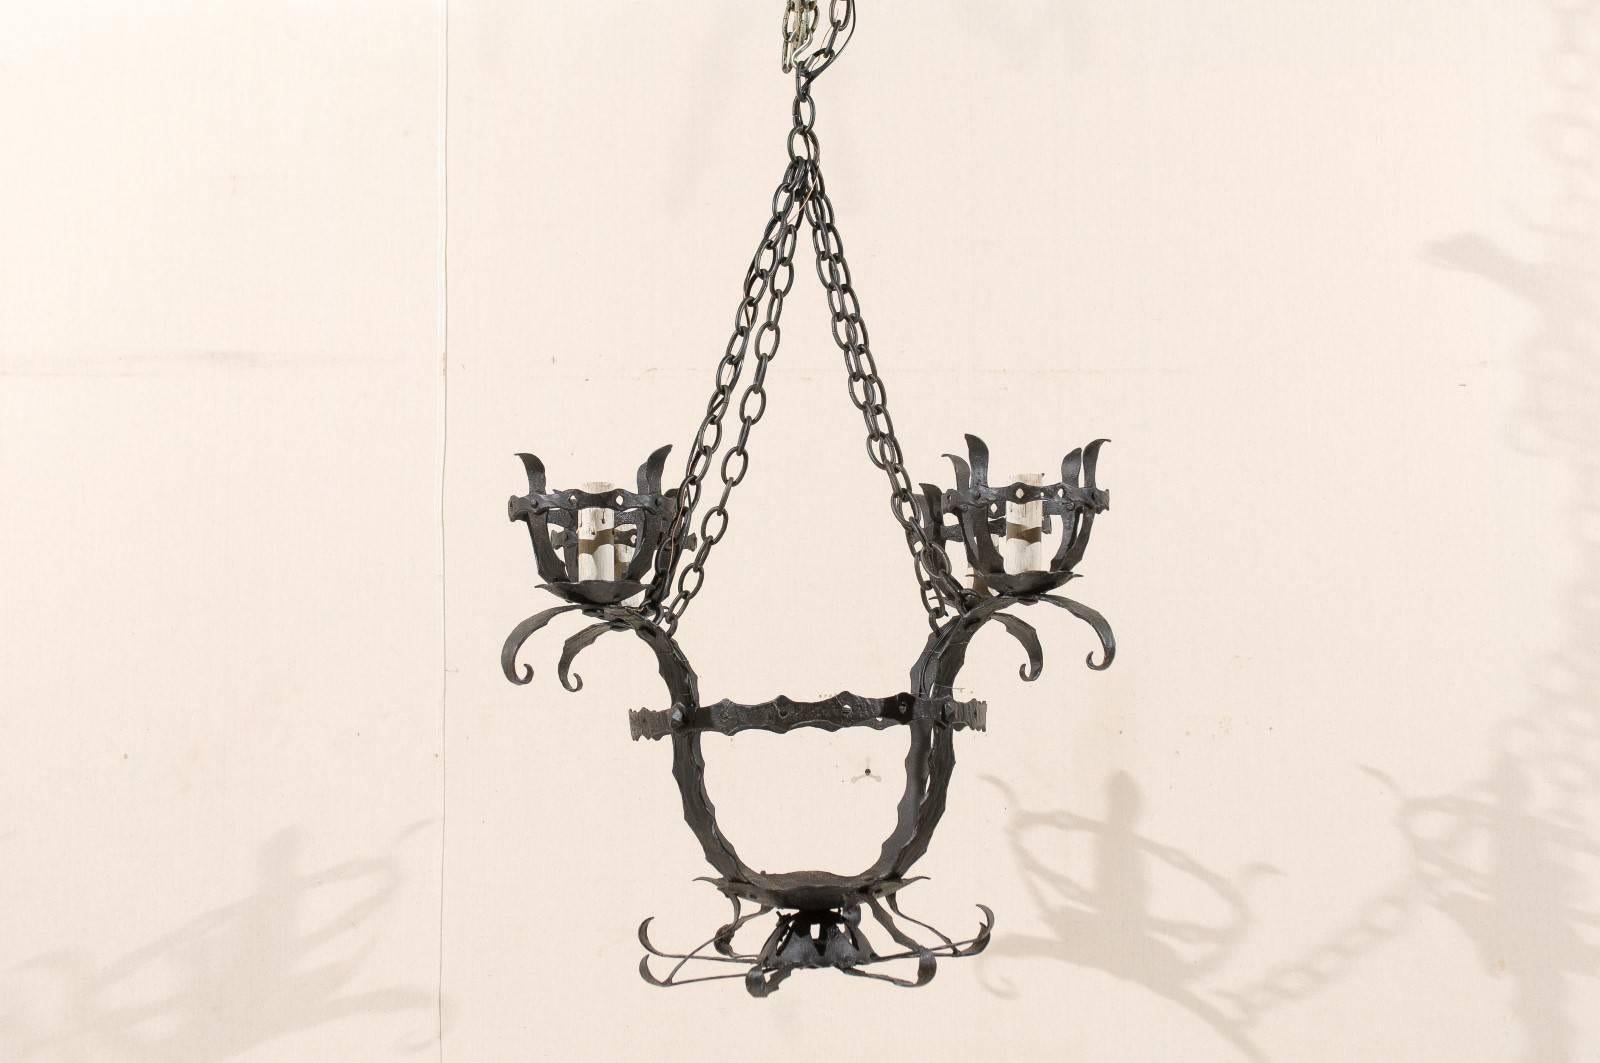 An Italian four-light iron chandelier. This Italian circular hammered iron chandelier from the mid-20th century features an overall basket style design. This piece has four arms that curve upward and support the repeated basket design four times